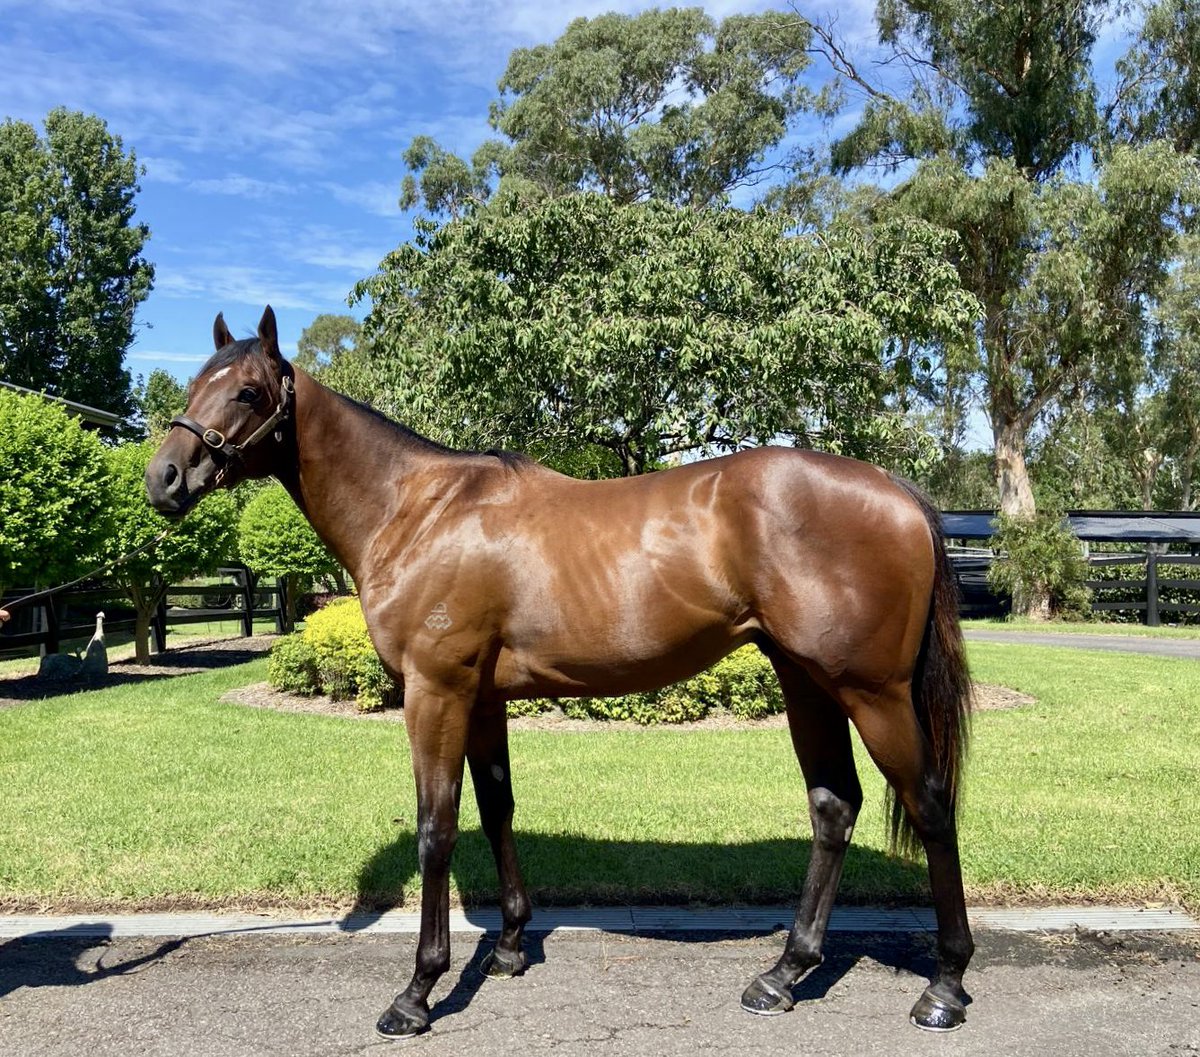 Congratulations to @cwallerracing Team with the maiden success of PRIVATE LIFE, his future looks bright. Seen here departing @CoolmoreAus Mt. White Farm to begin his preparation.